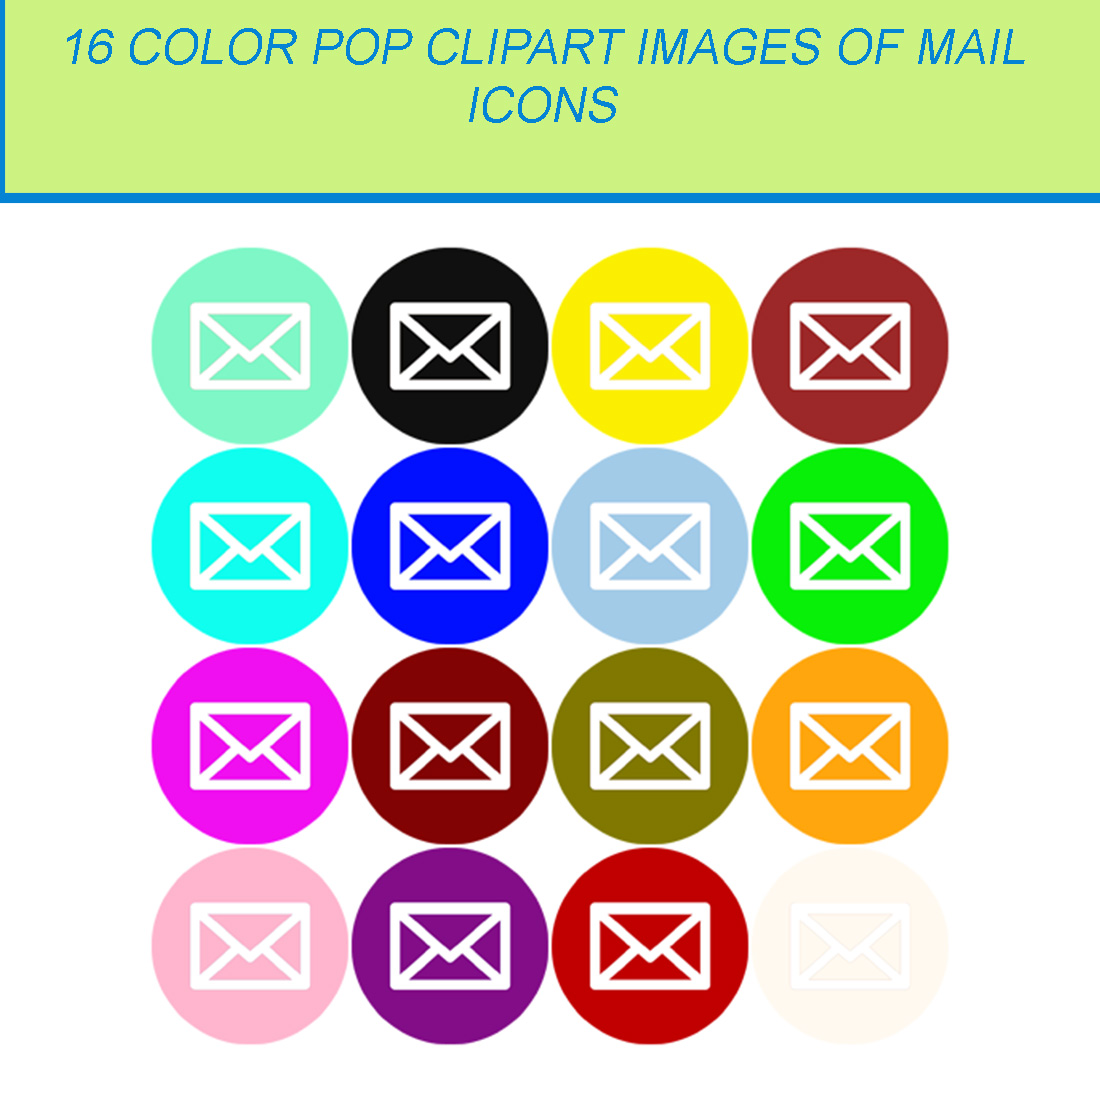 16 COLOR POP CLIPART IMAGES OF MAIL ICON cover image.